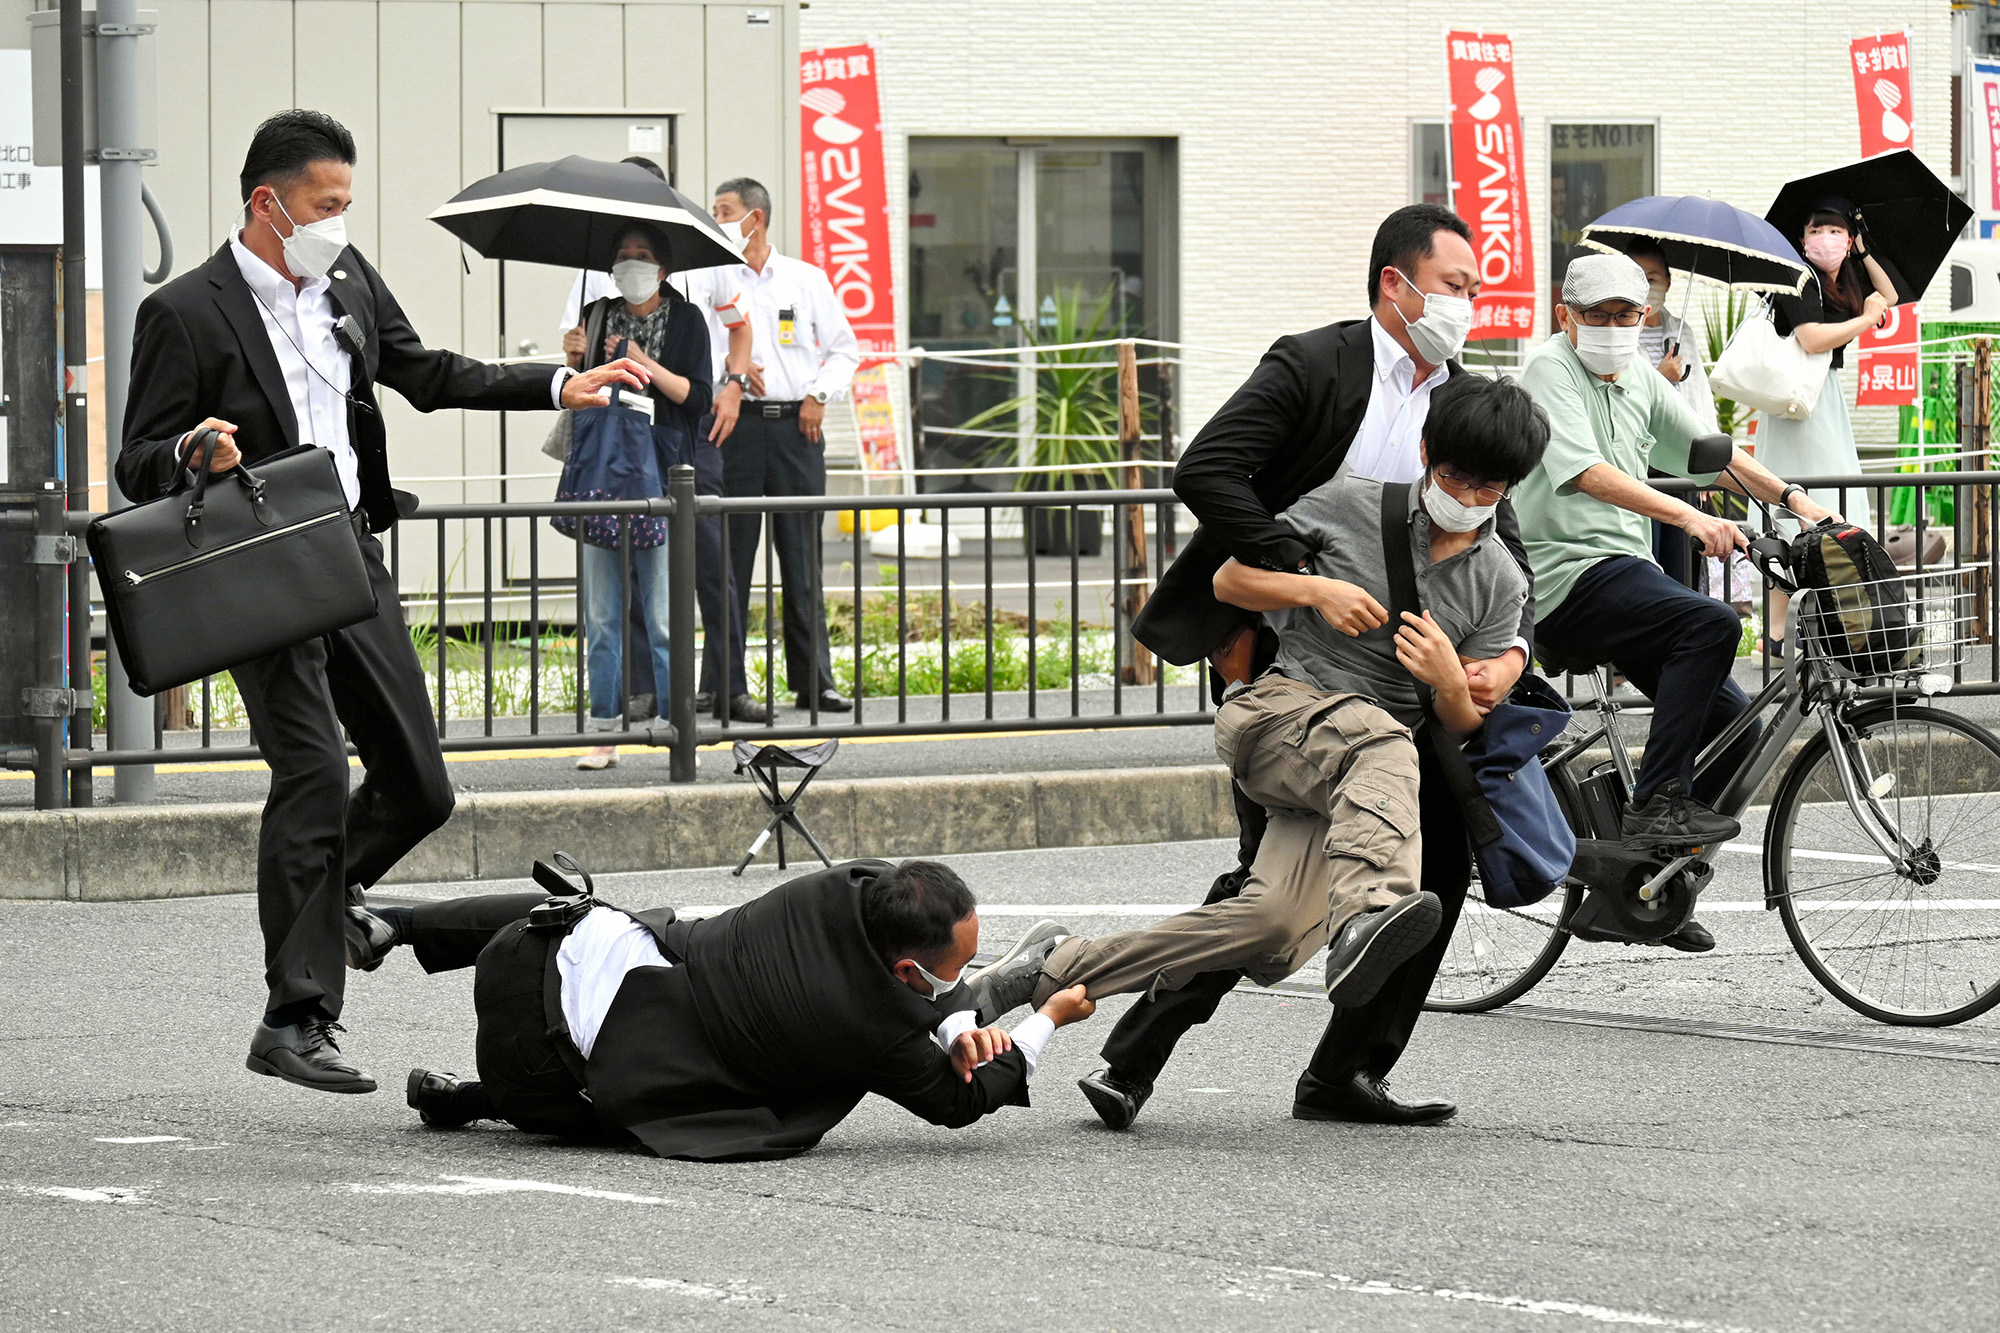 Security police tackle to arrest a suspect who is believed to have shot former Prime Minister Shinzo Abe in front of Yamatosaidaiji Station on July 8.